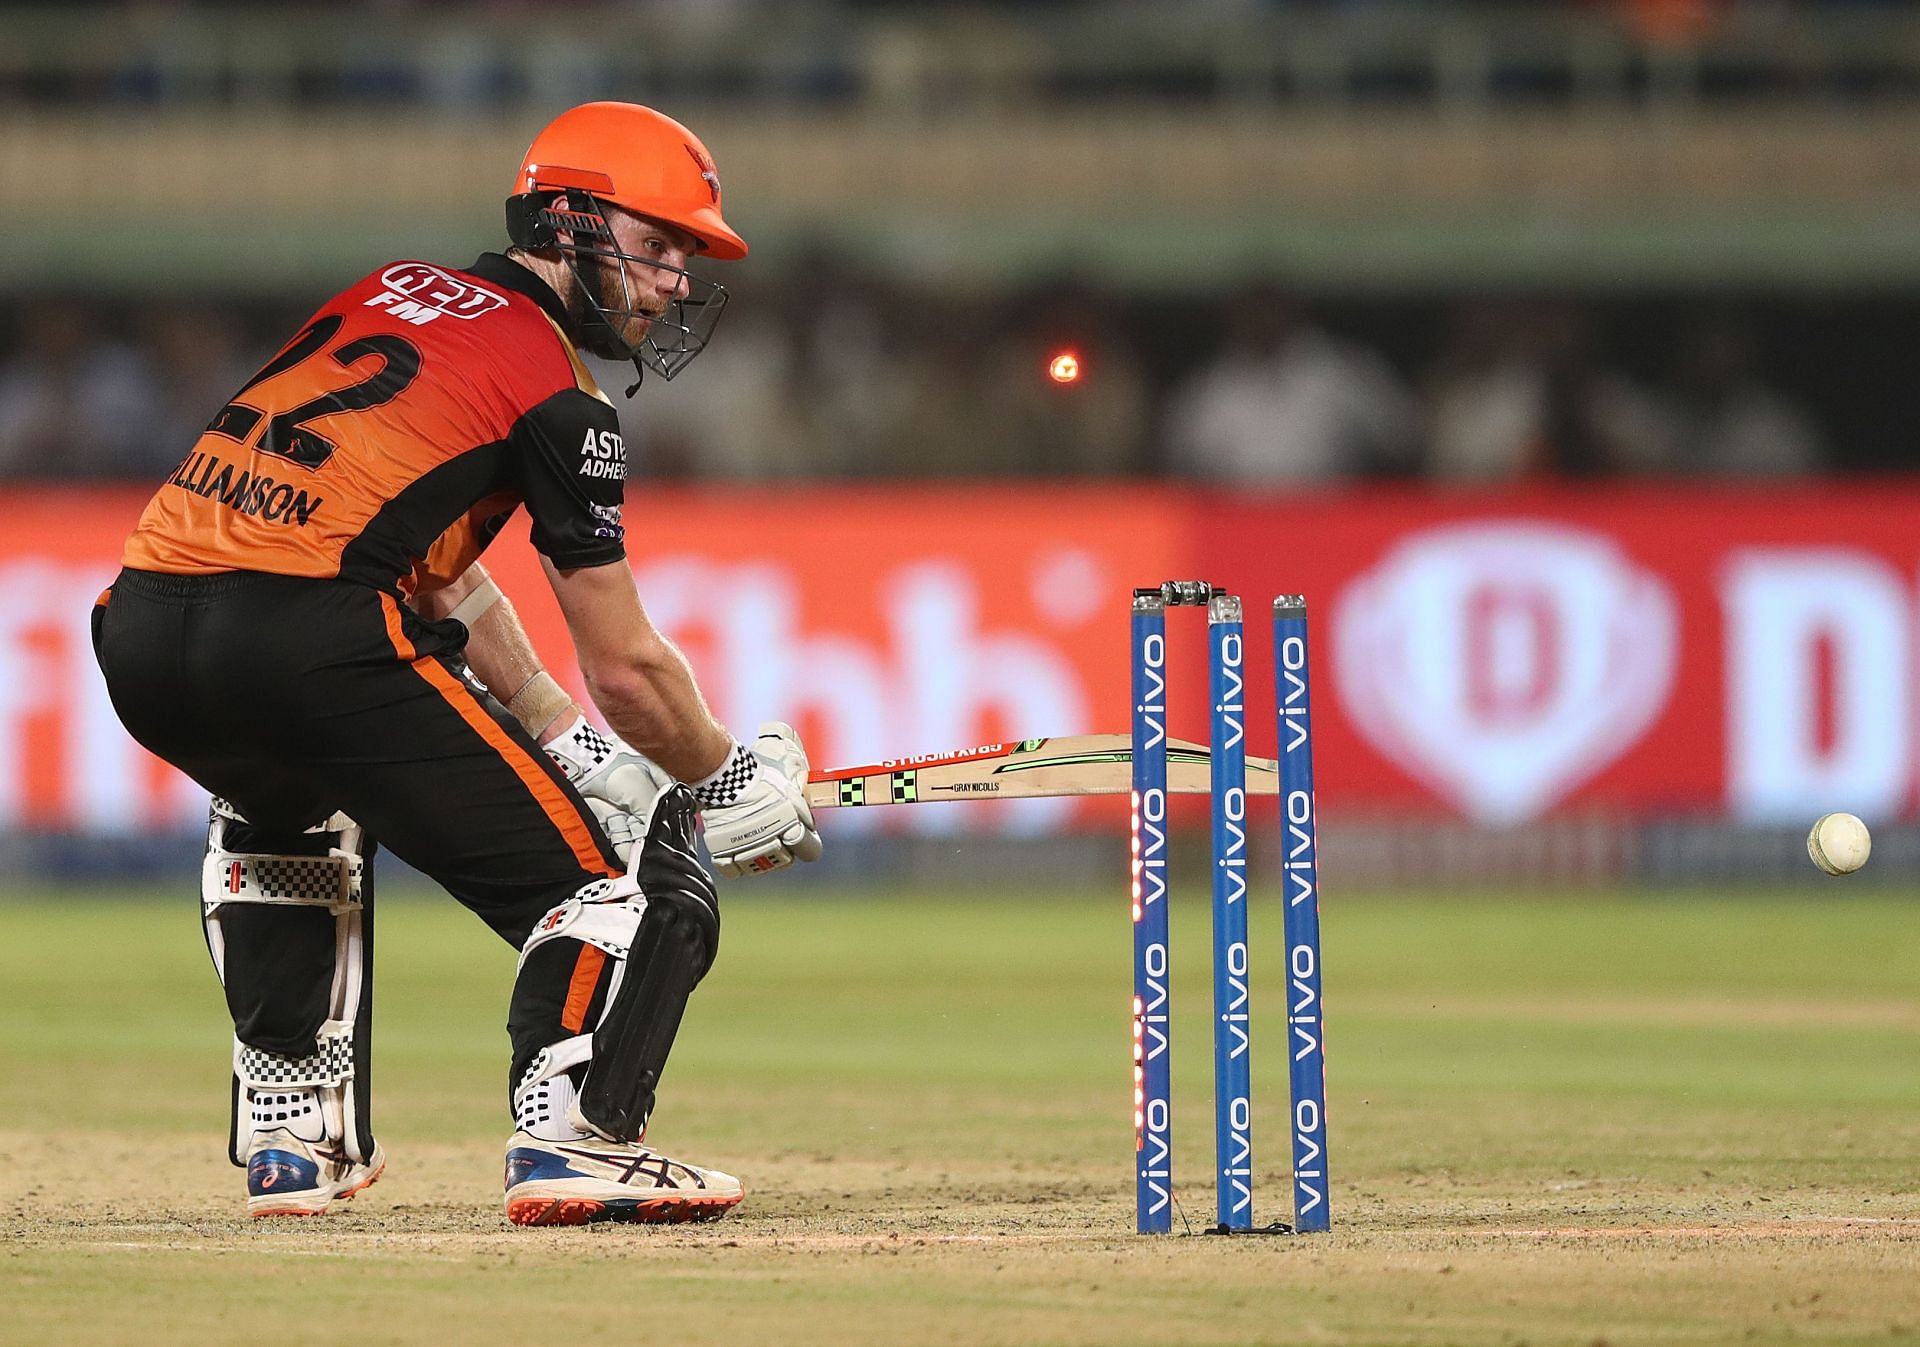 Kane Williamson will look to score big in his first match of IPL 2022 (Image courtesy: Getty Images)